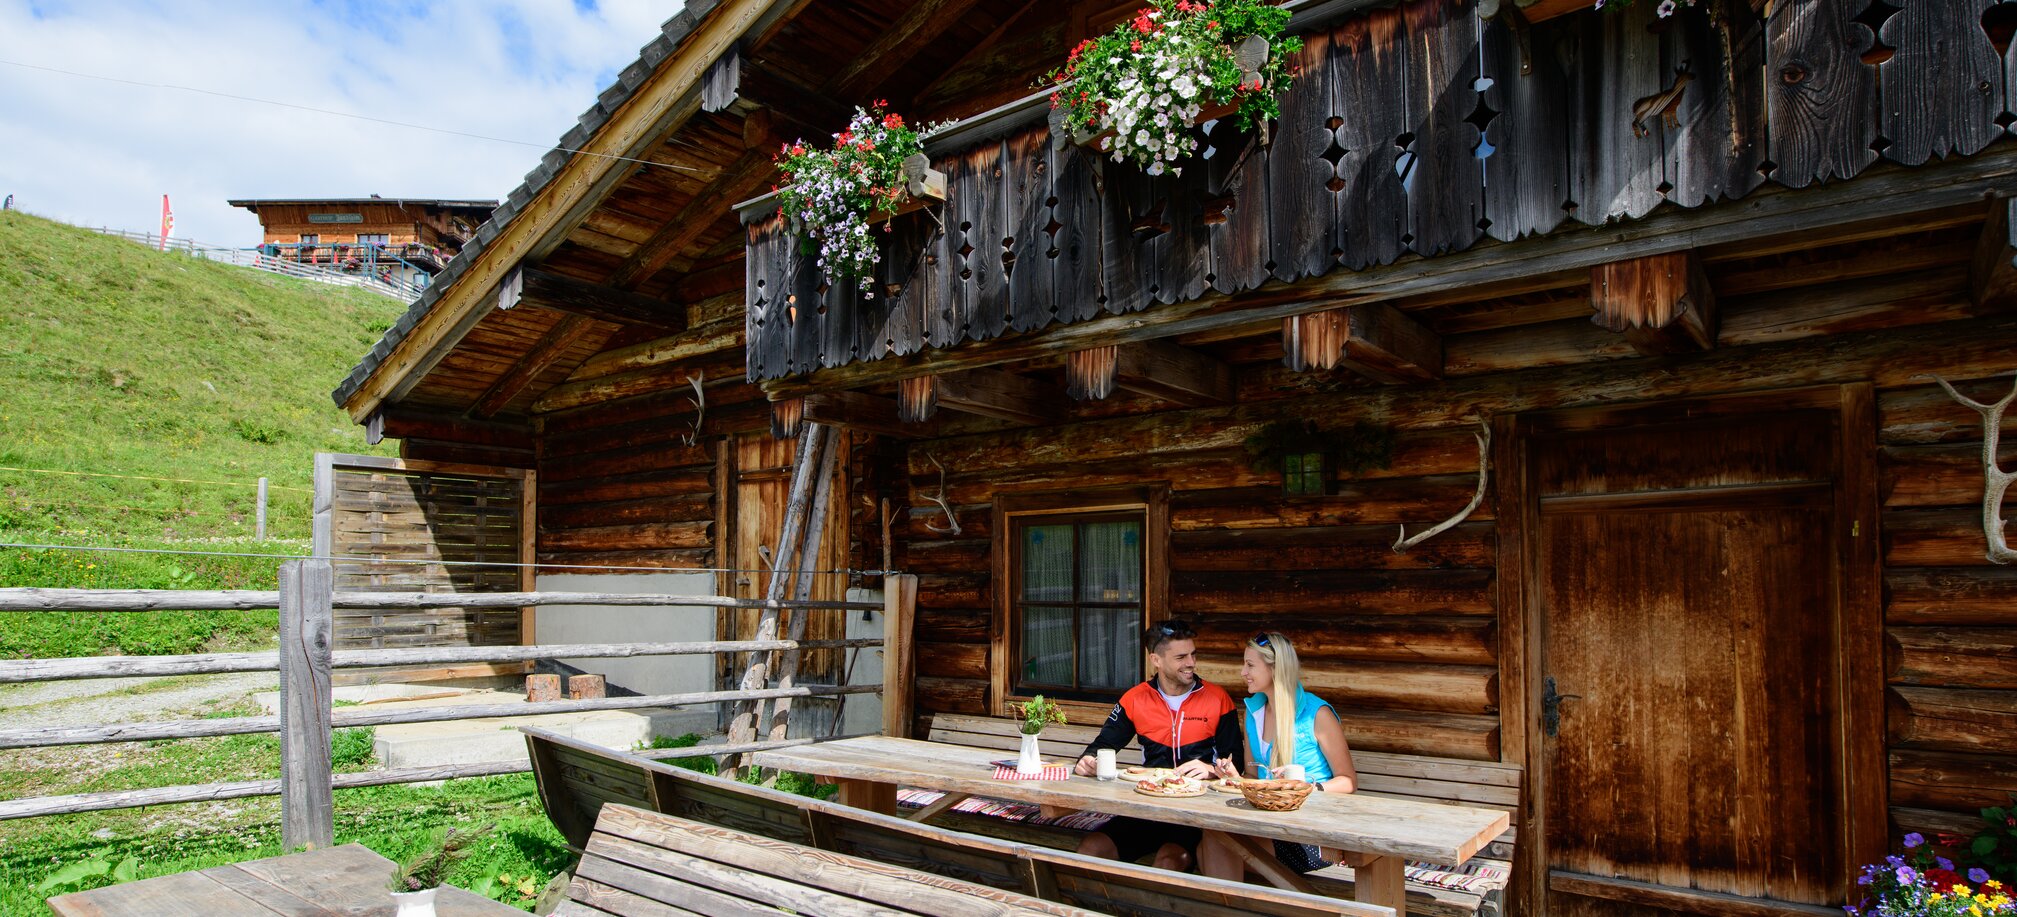 Culinary enjoyment in summer with regional specialties on the mountain huts in Ski amadé